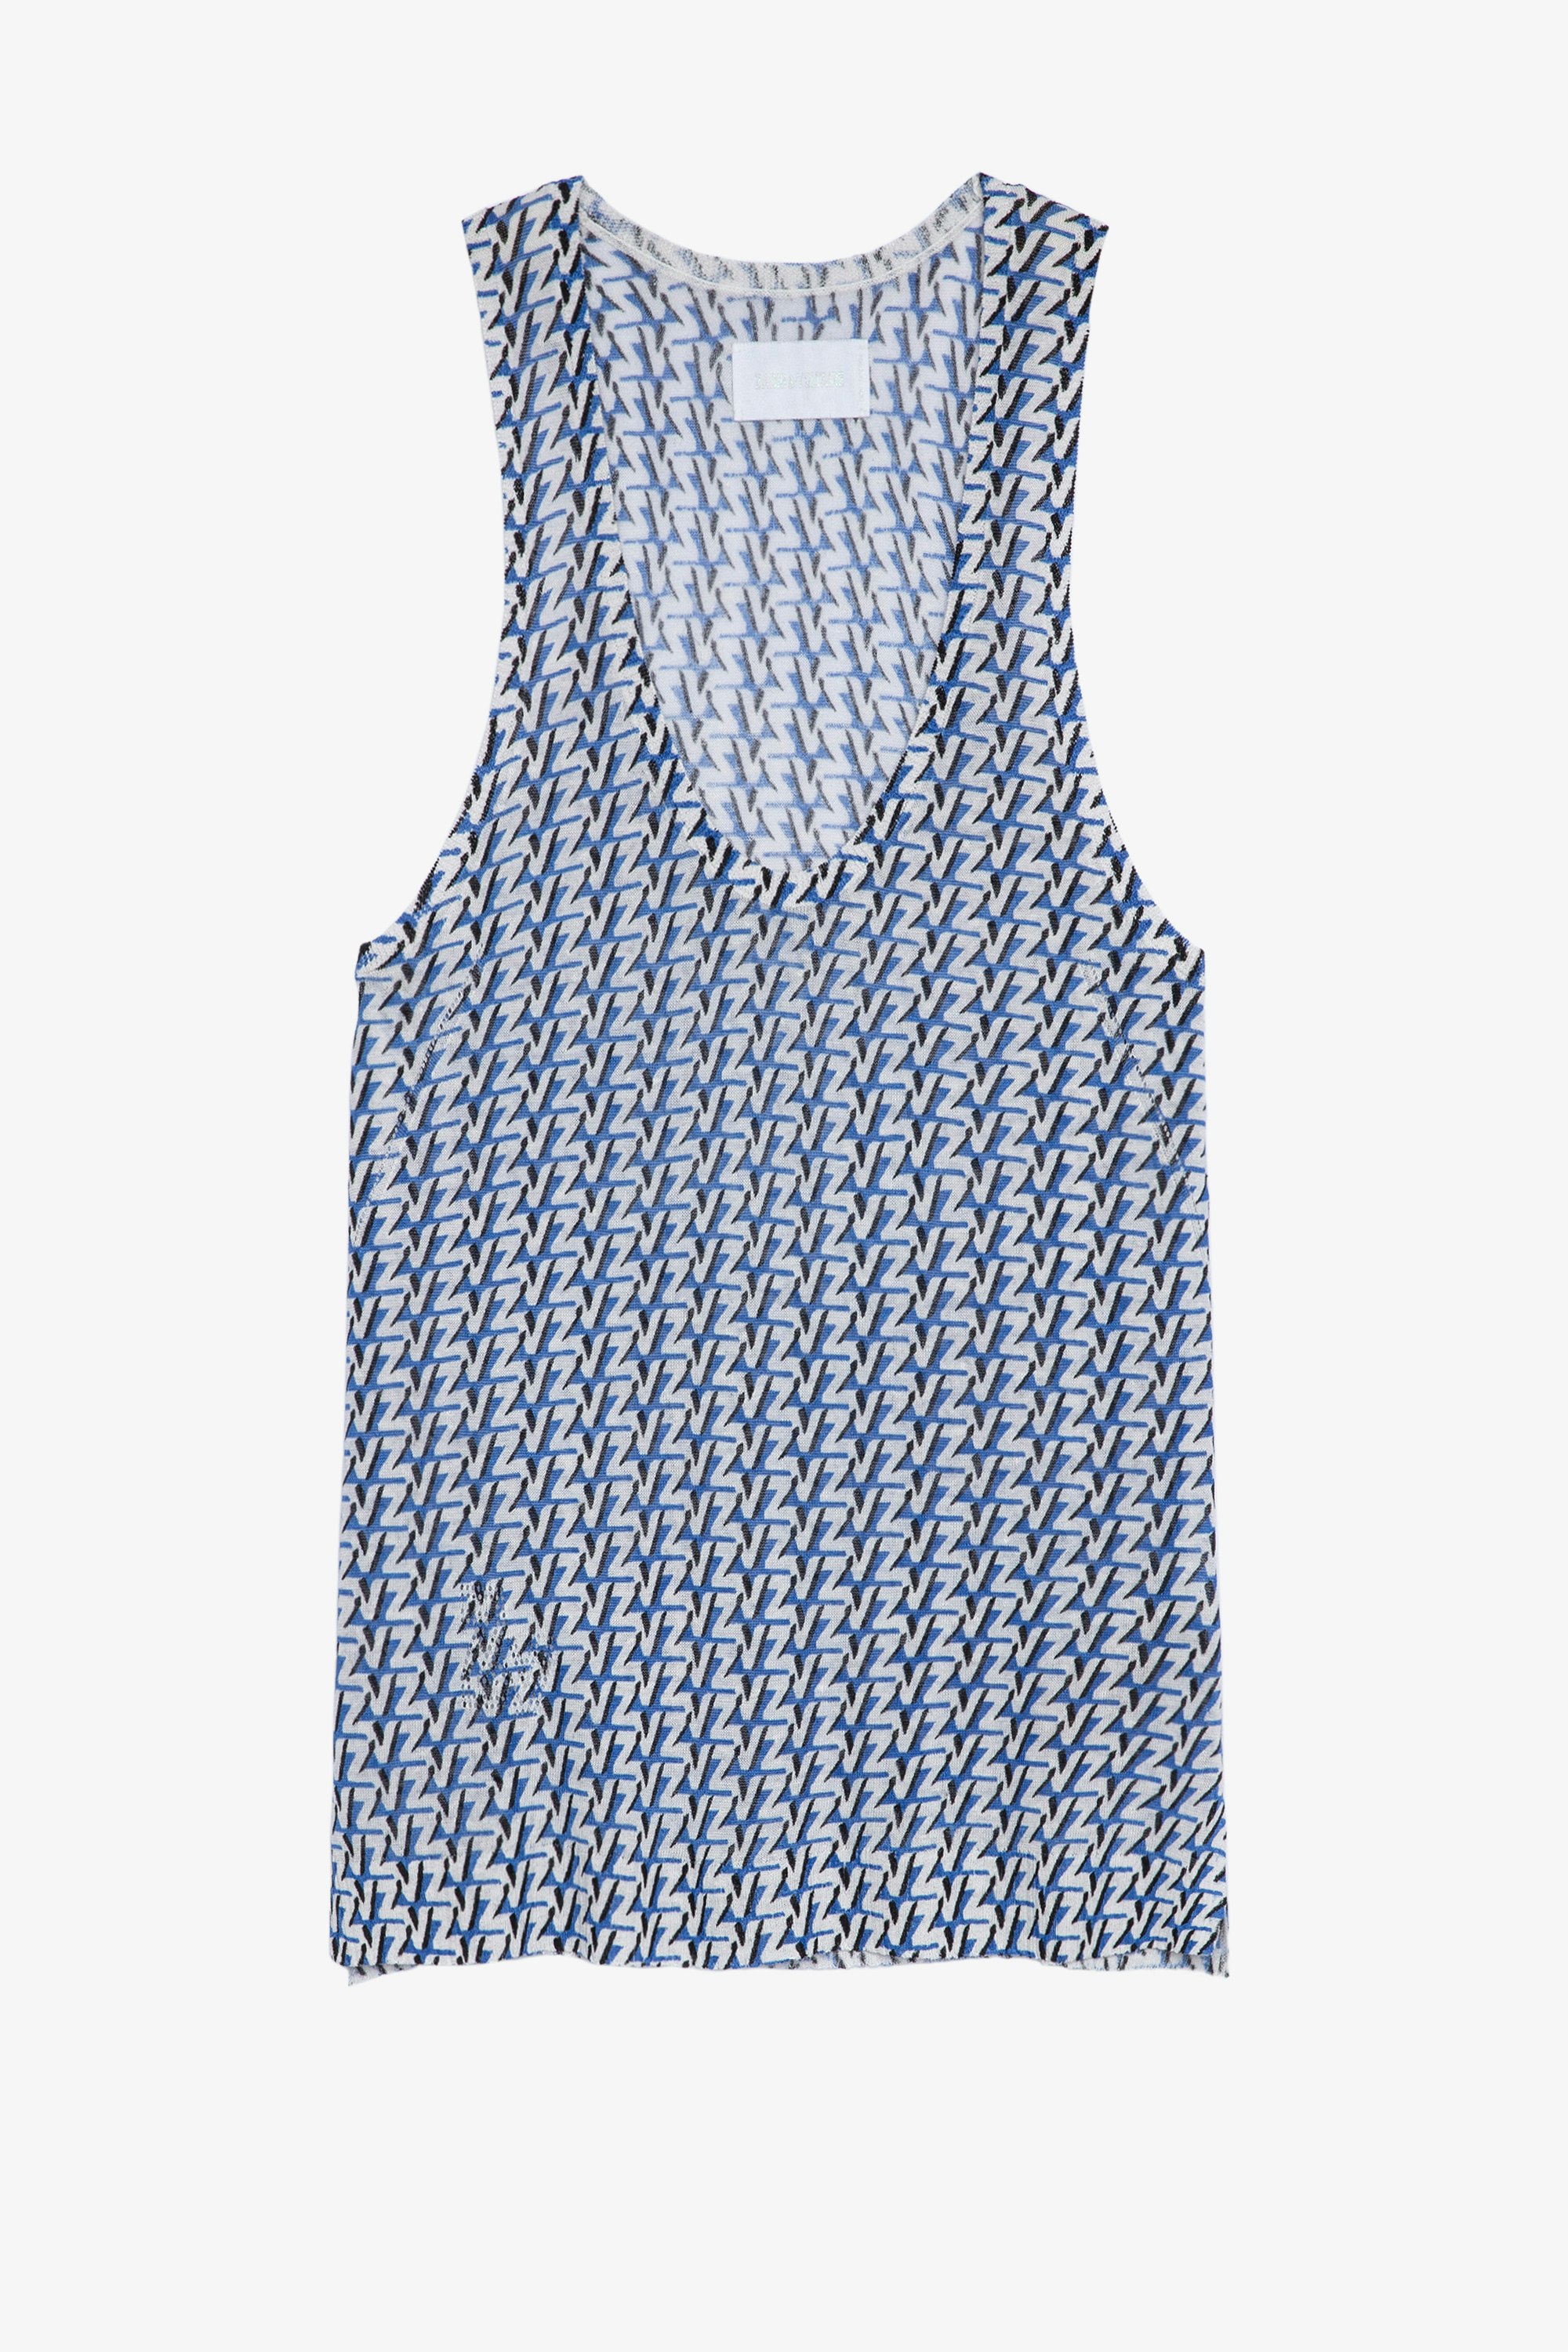 Lee Tank Top Leinen Women's beige and blue linen tank top with ZV all-over pattern